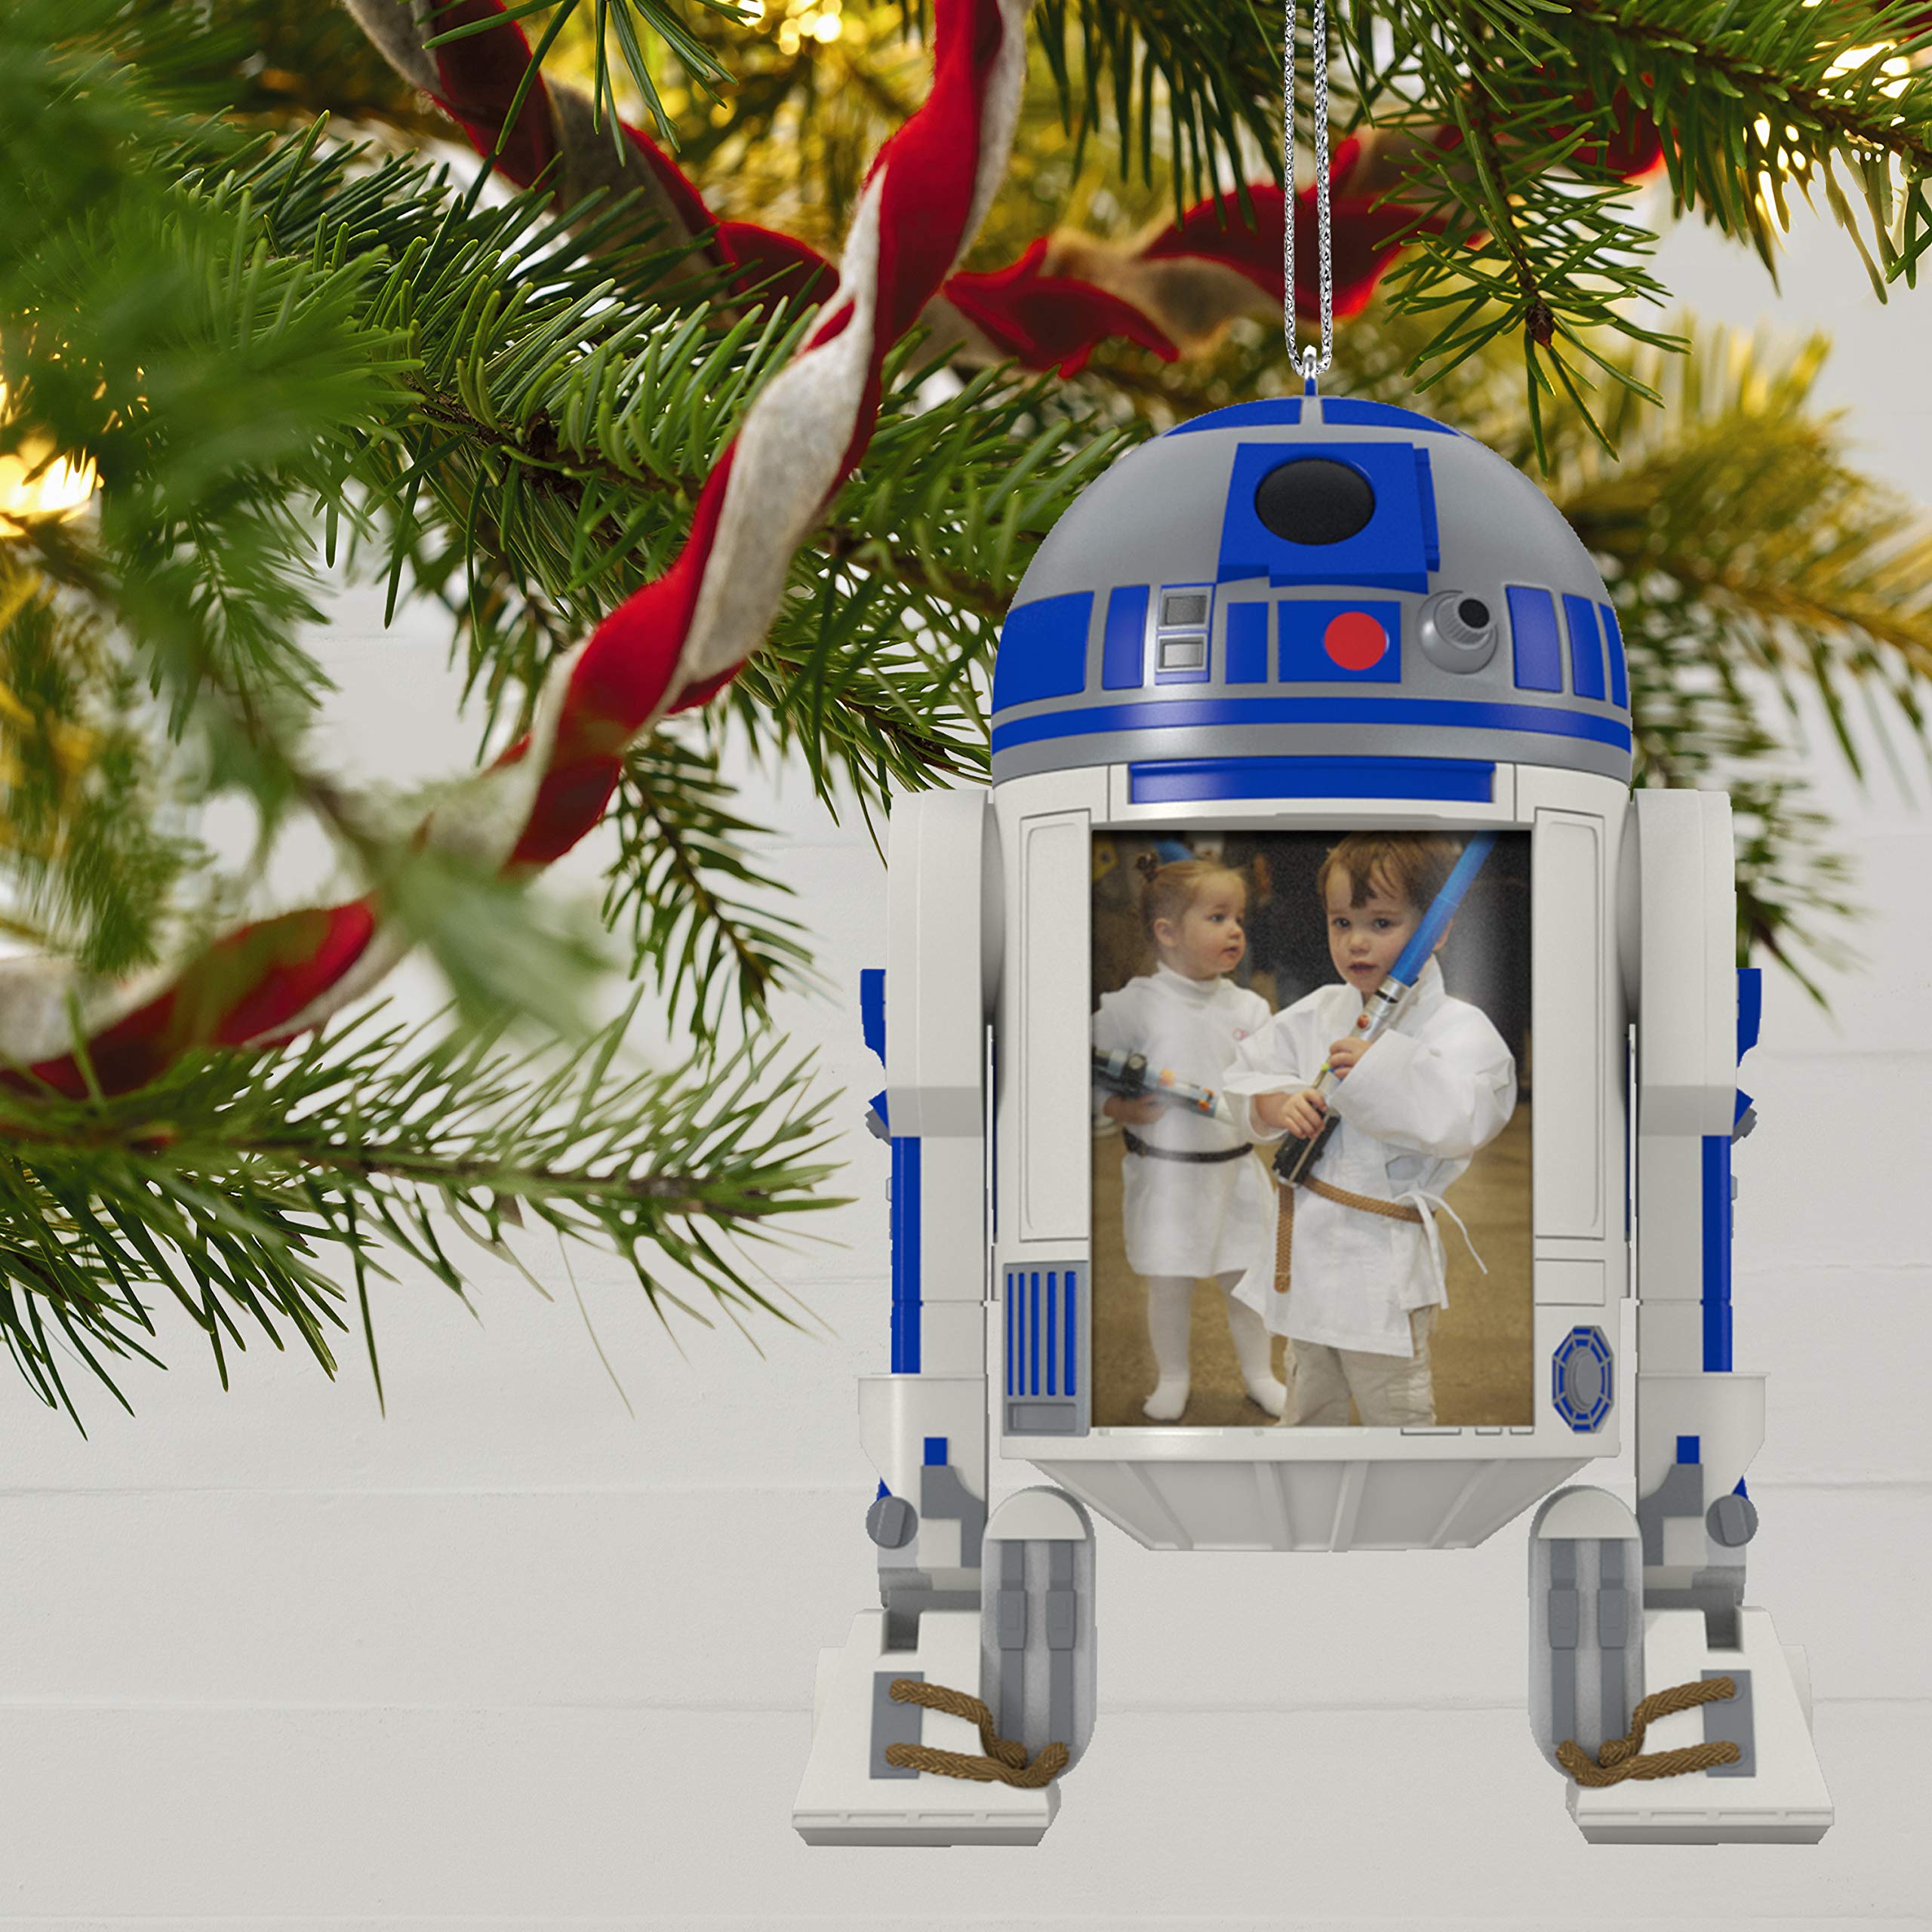 Hallmark Keepsake Christmas Ornament 2020, Star Wars R2-D2 The Force Is With Us Photo Frame (1799QXI6011)